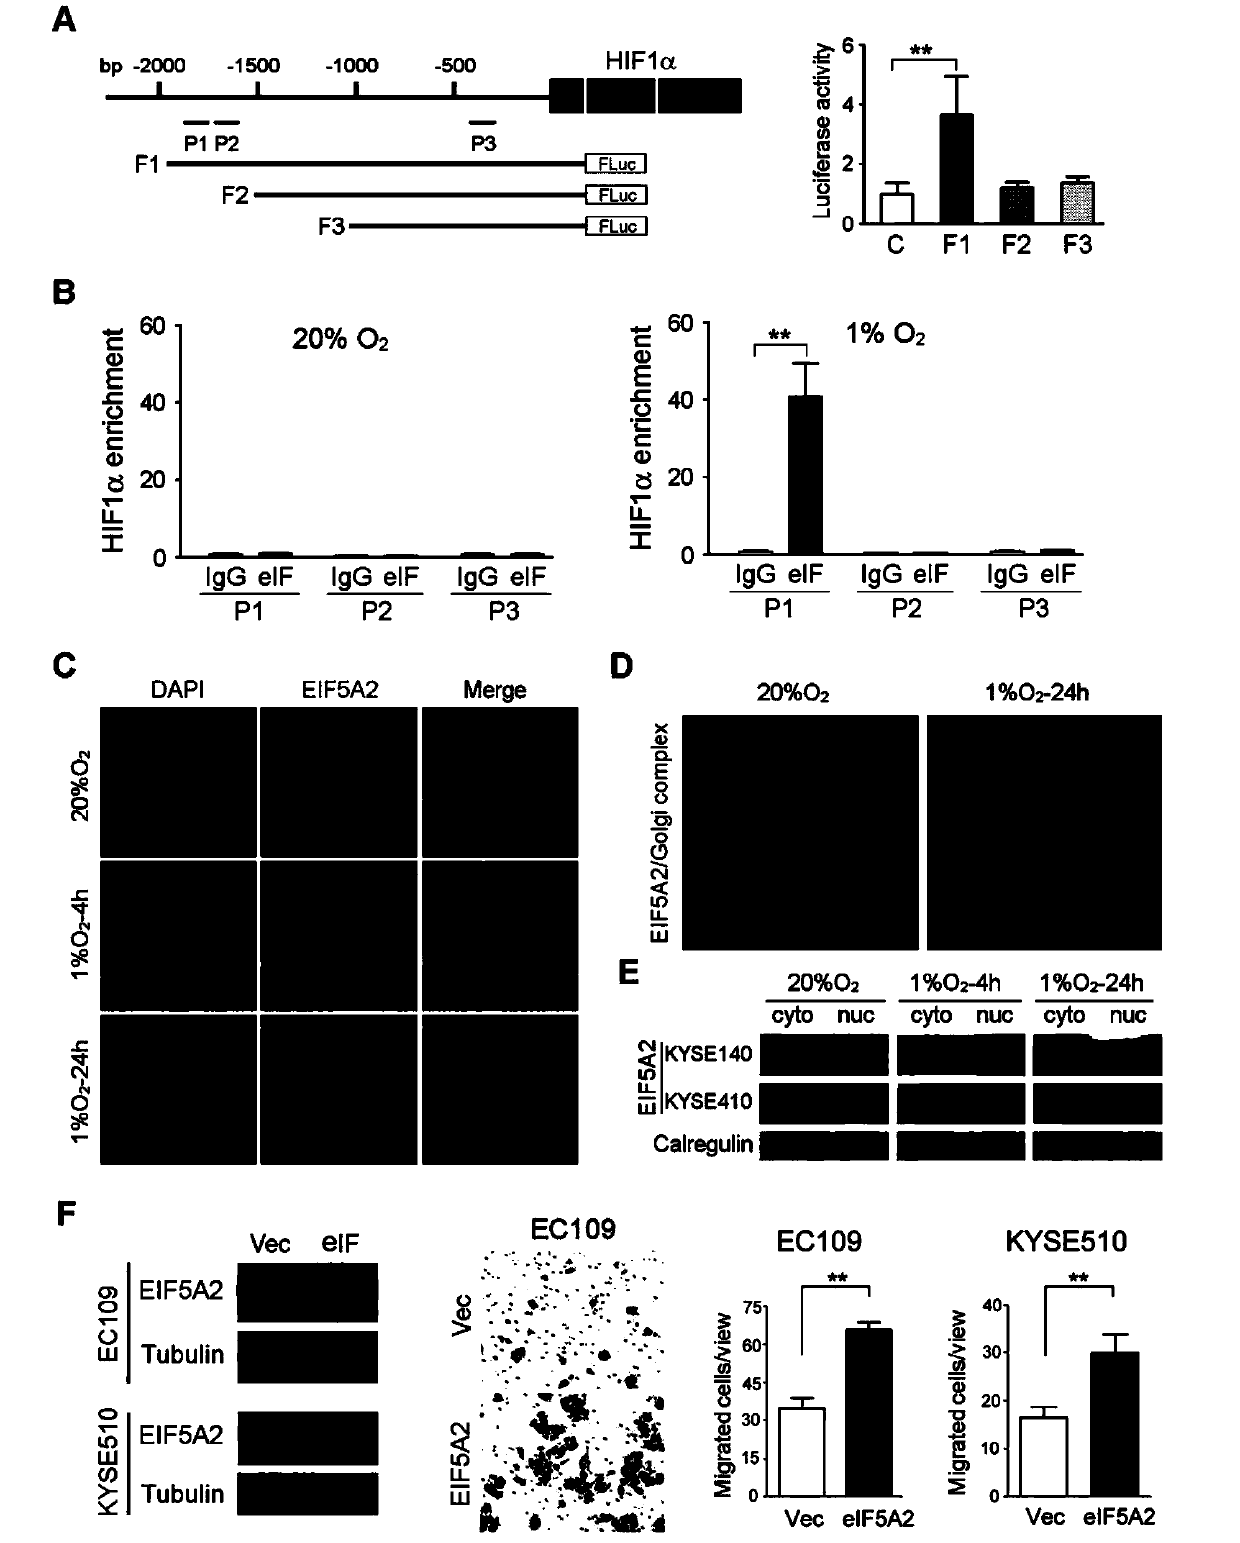 Application of EIF5A2 to preparation of esophageal squamous cell carcinoma prognosis reagent